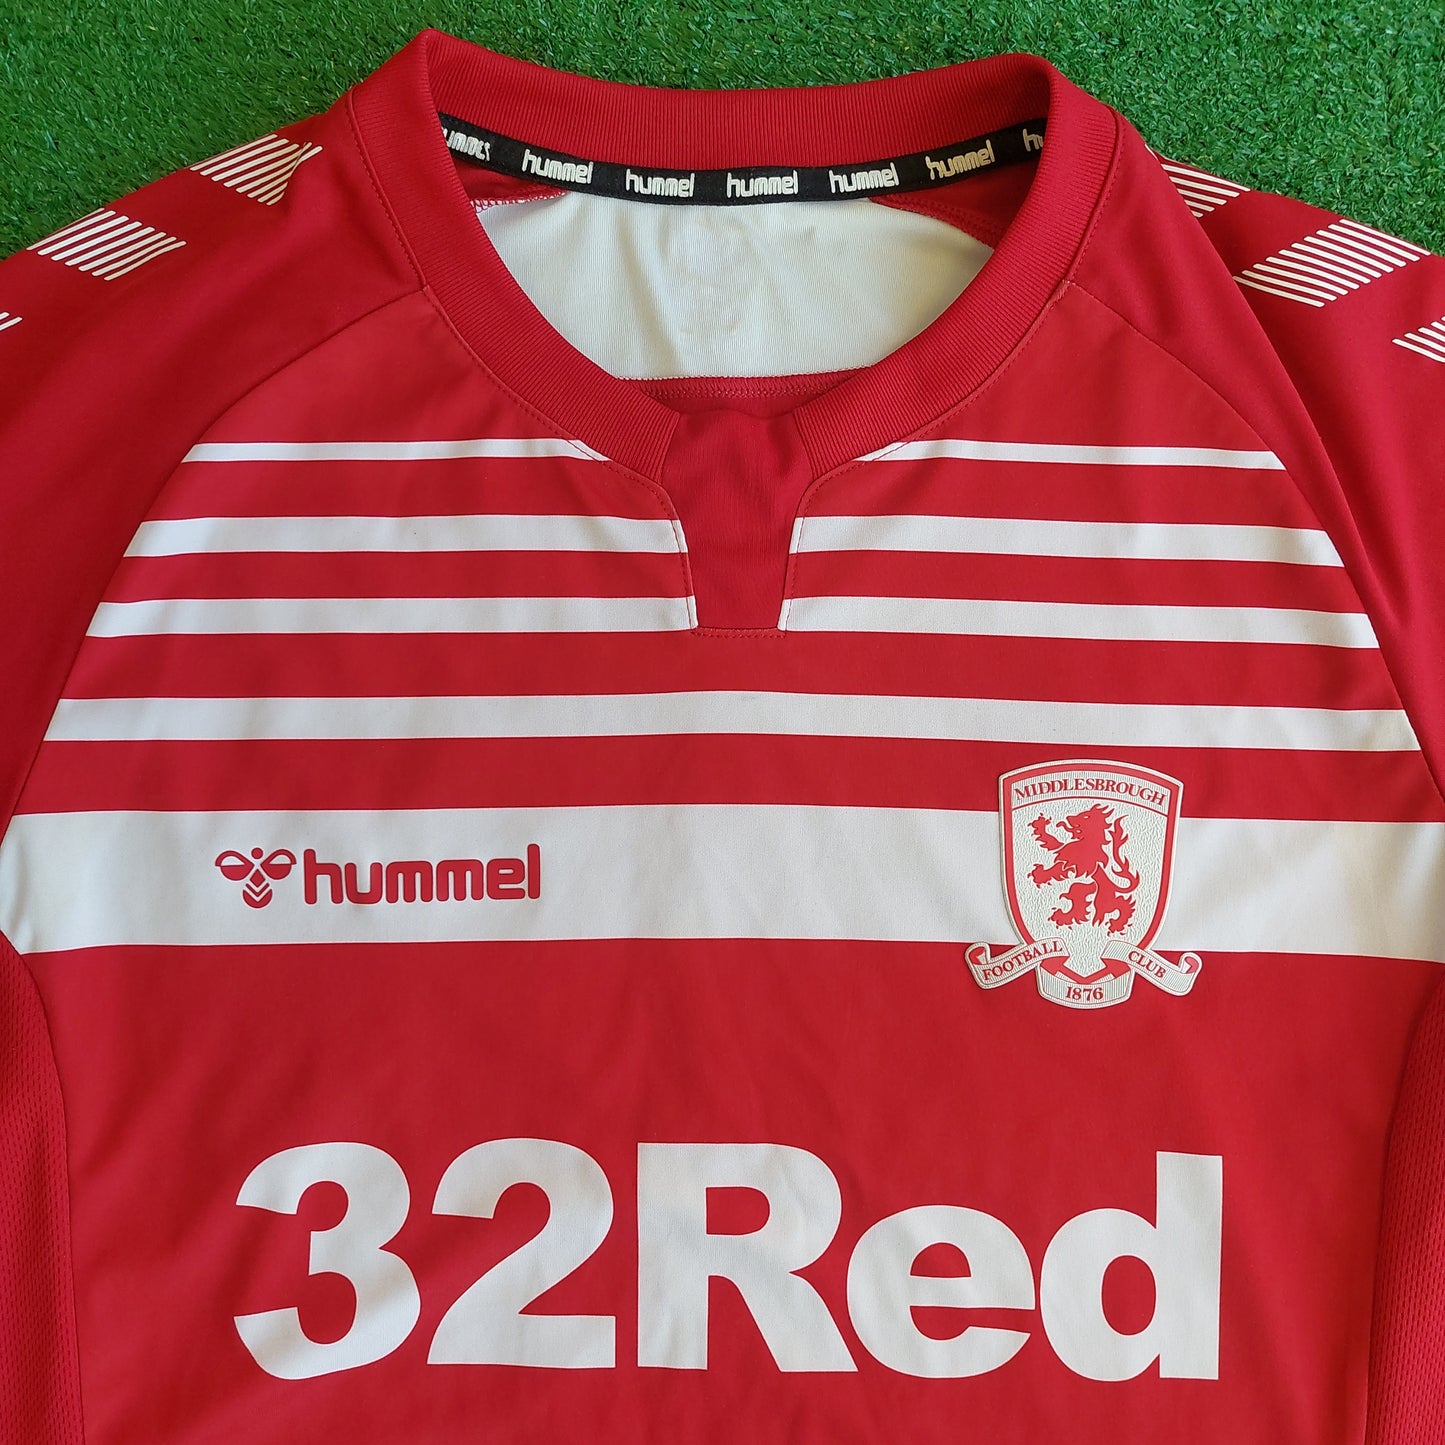 Middlesbrough 2019/20 Home Shirt (Excellent) - Size S